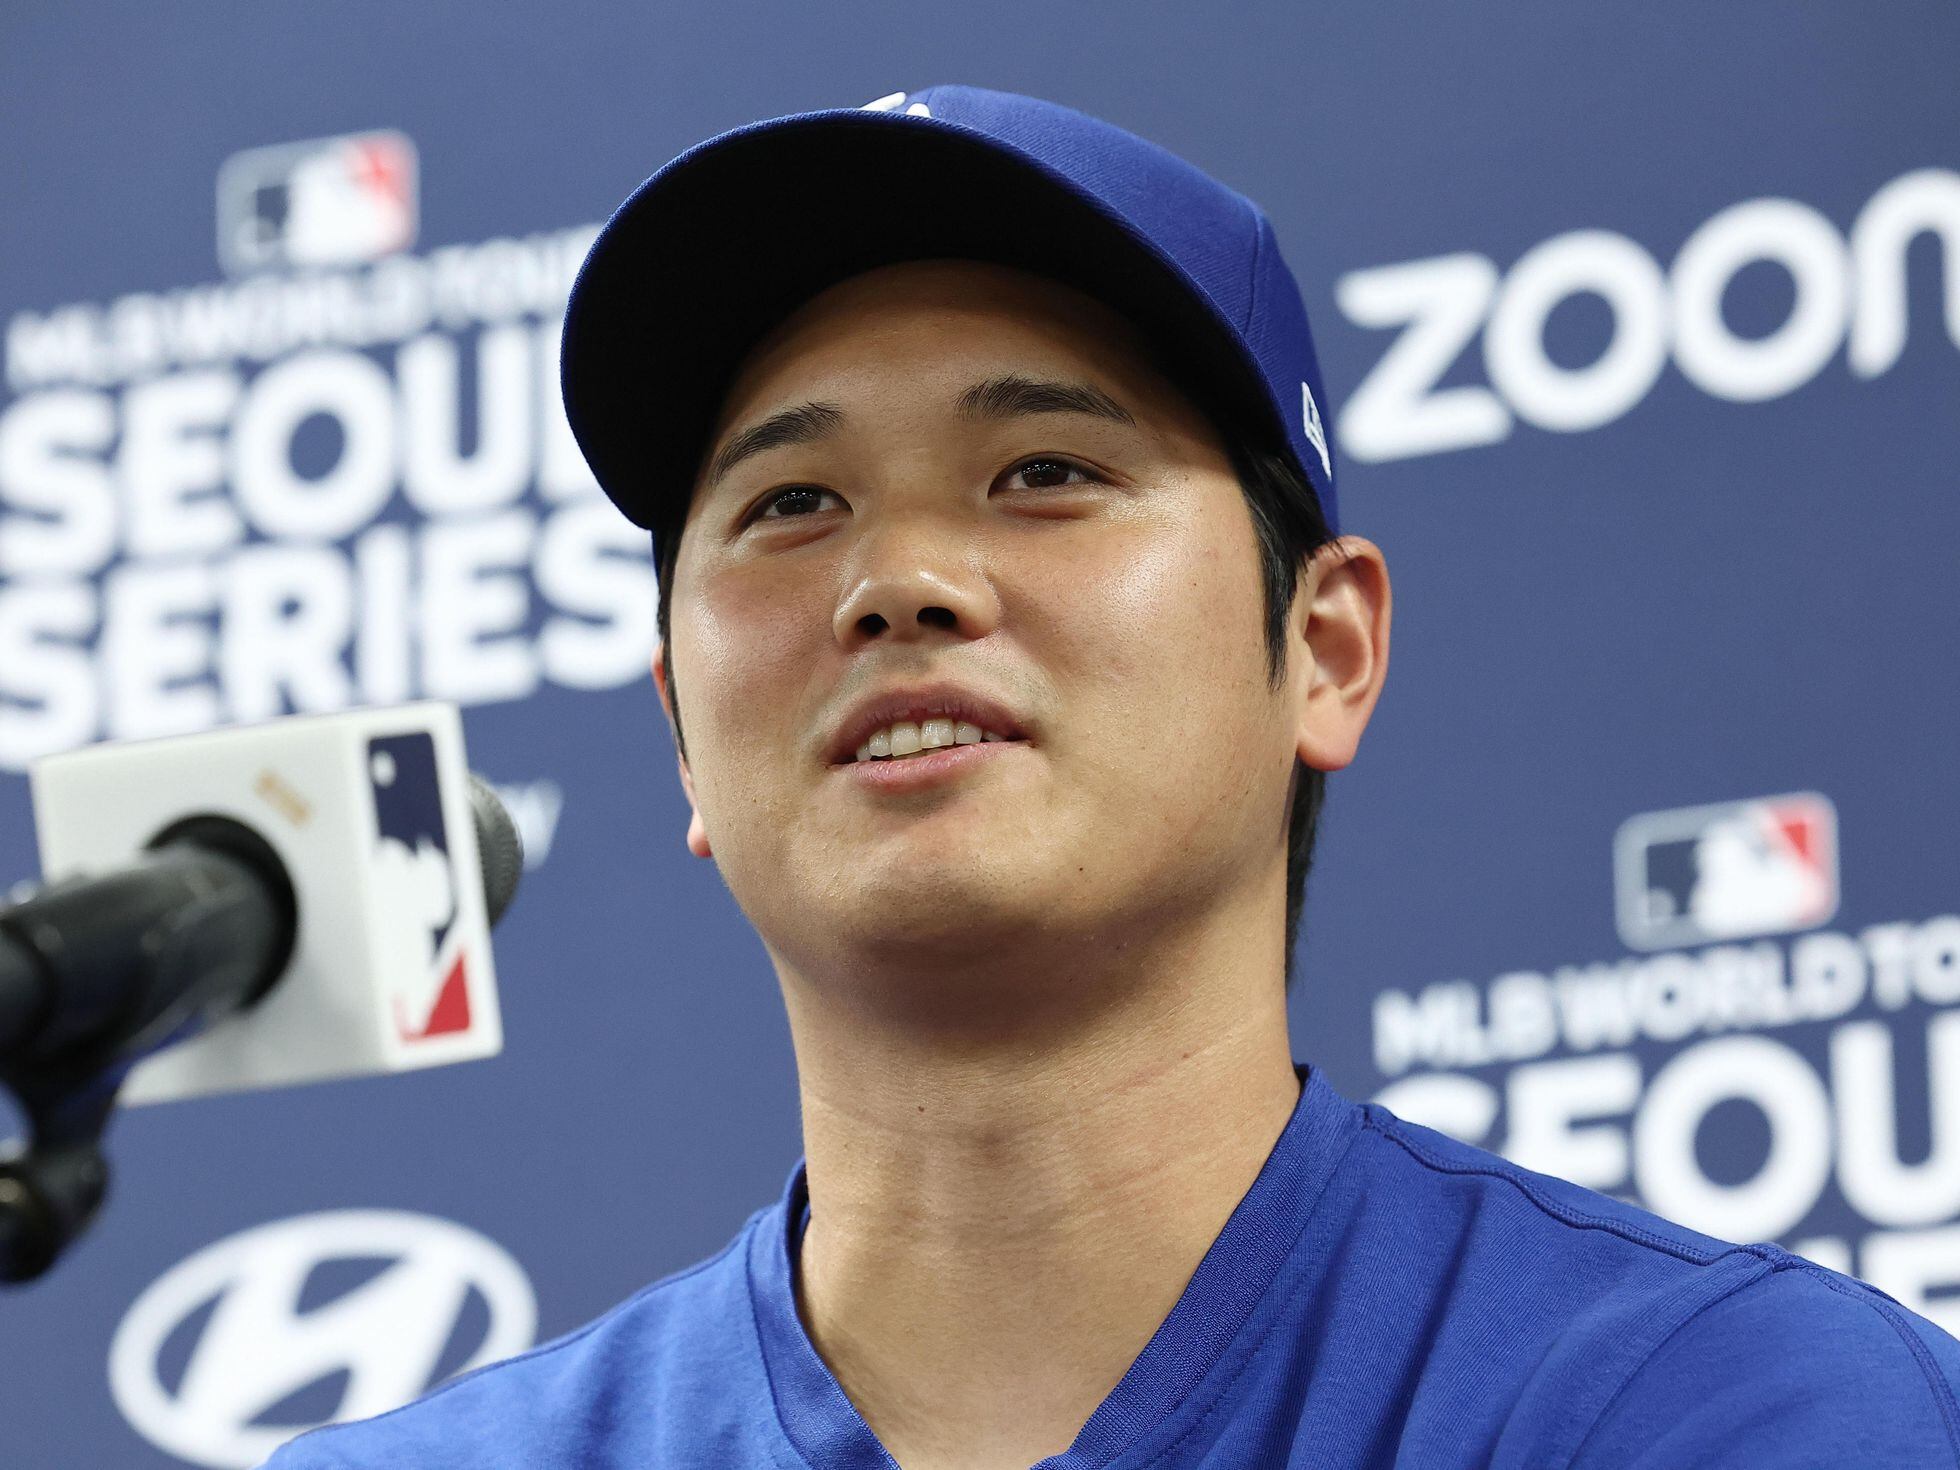 Behold the price of being an Ohtani fan in Japan. $510 Dodgers jerseys and $150  caps, Sports